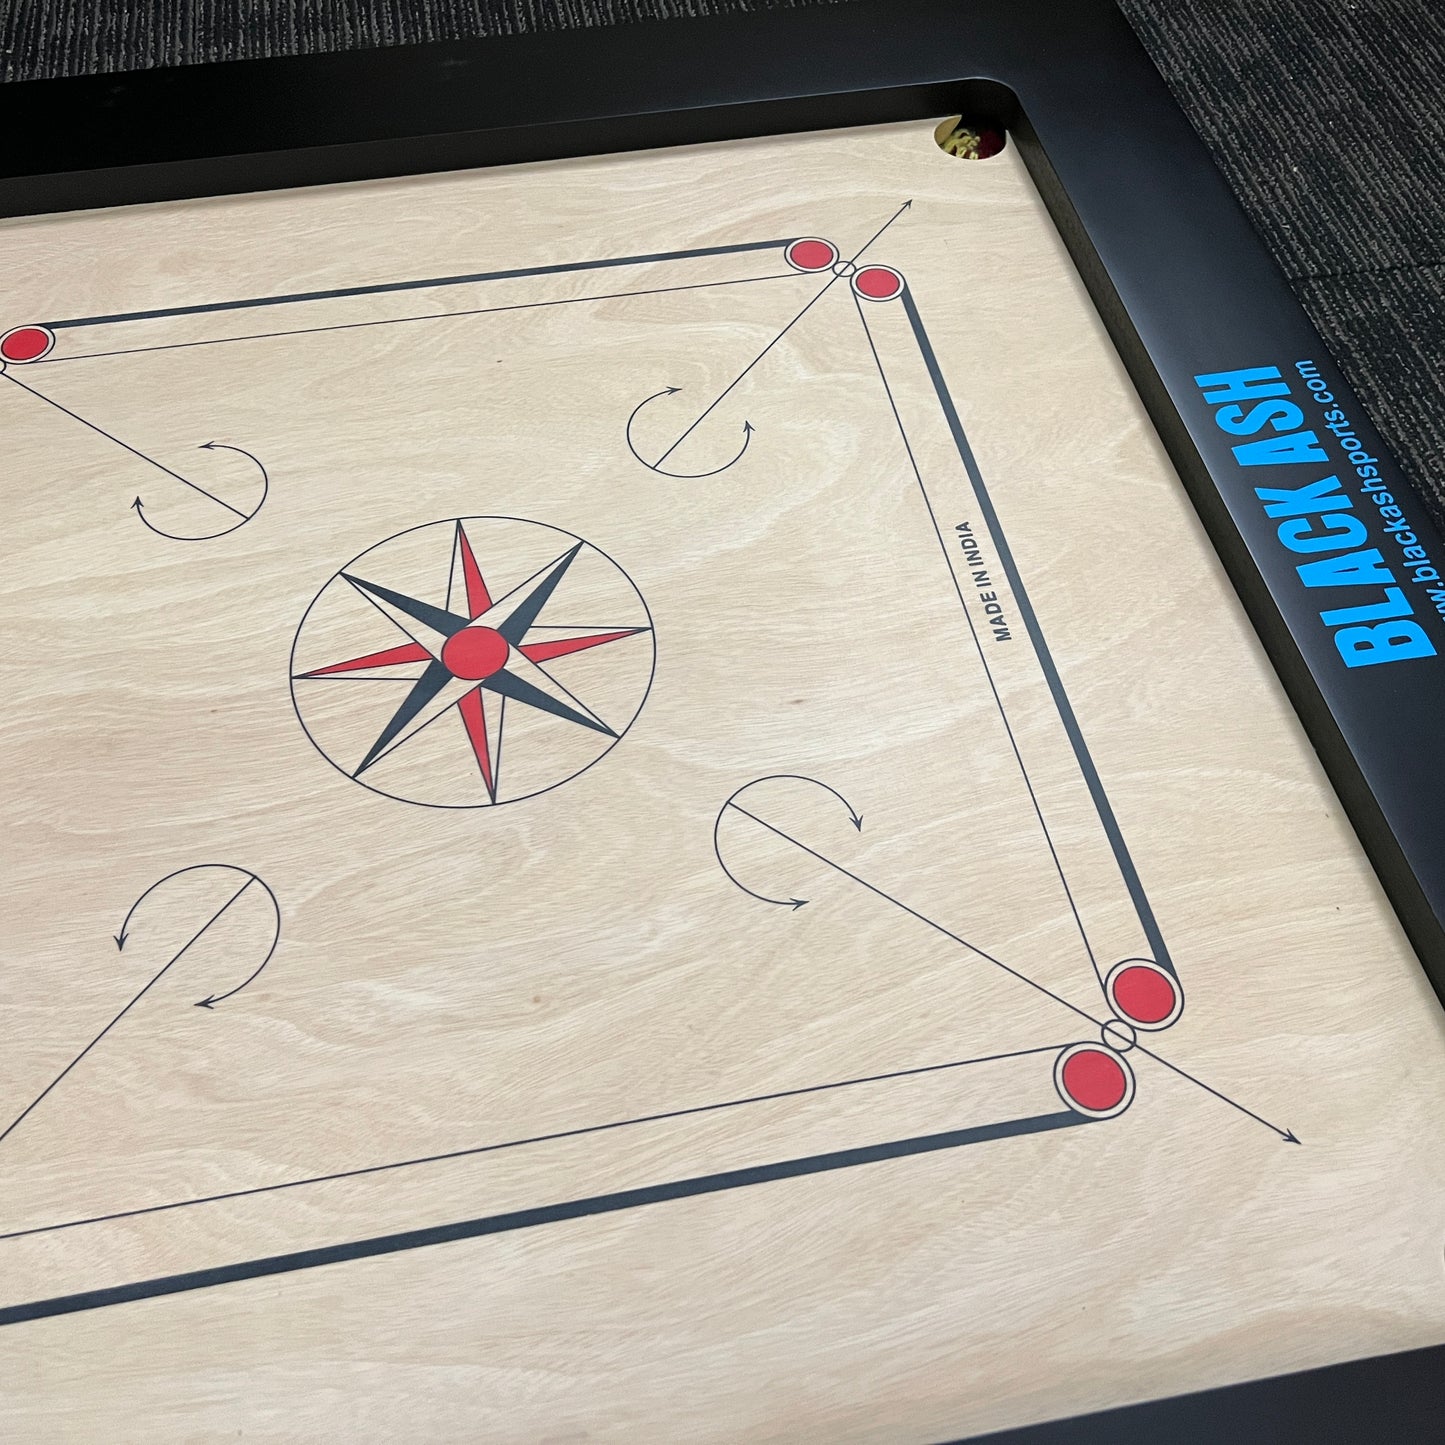 PRECISE Bulldog A-One carrom board, 24mm thick special selected A-One waterproof ply, 37x37 inches overall with a 29x29 inch playing area and 4-inch borders. Comes with a striker and set of coins, approved for use in state ranking tournaments